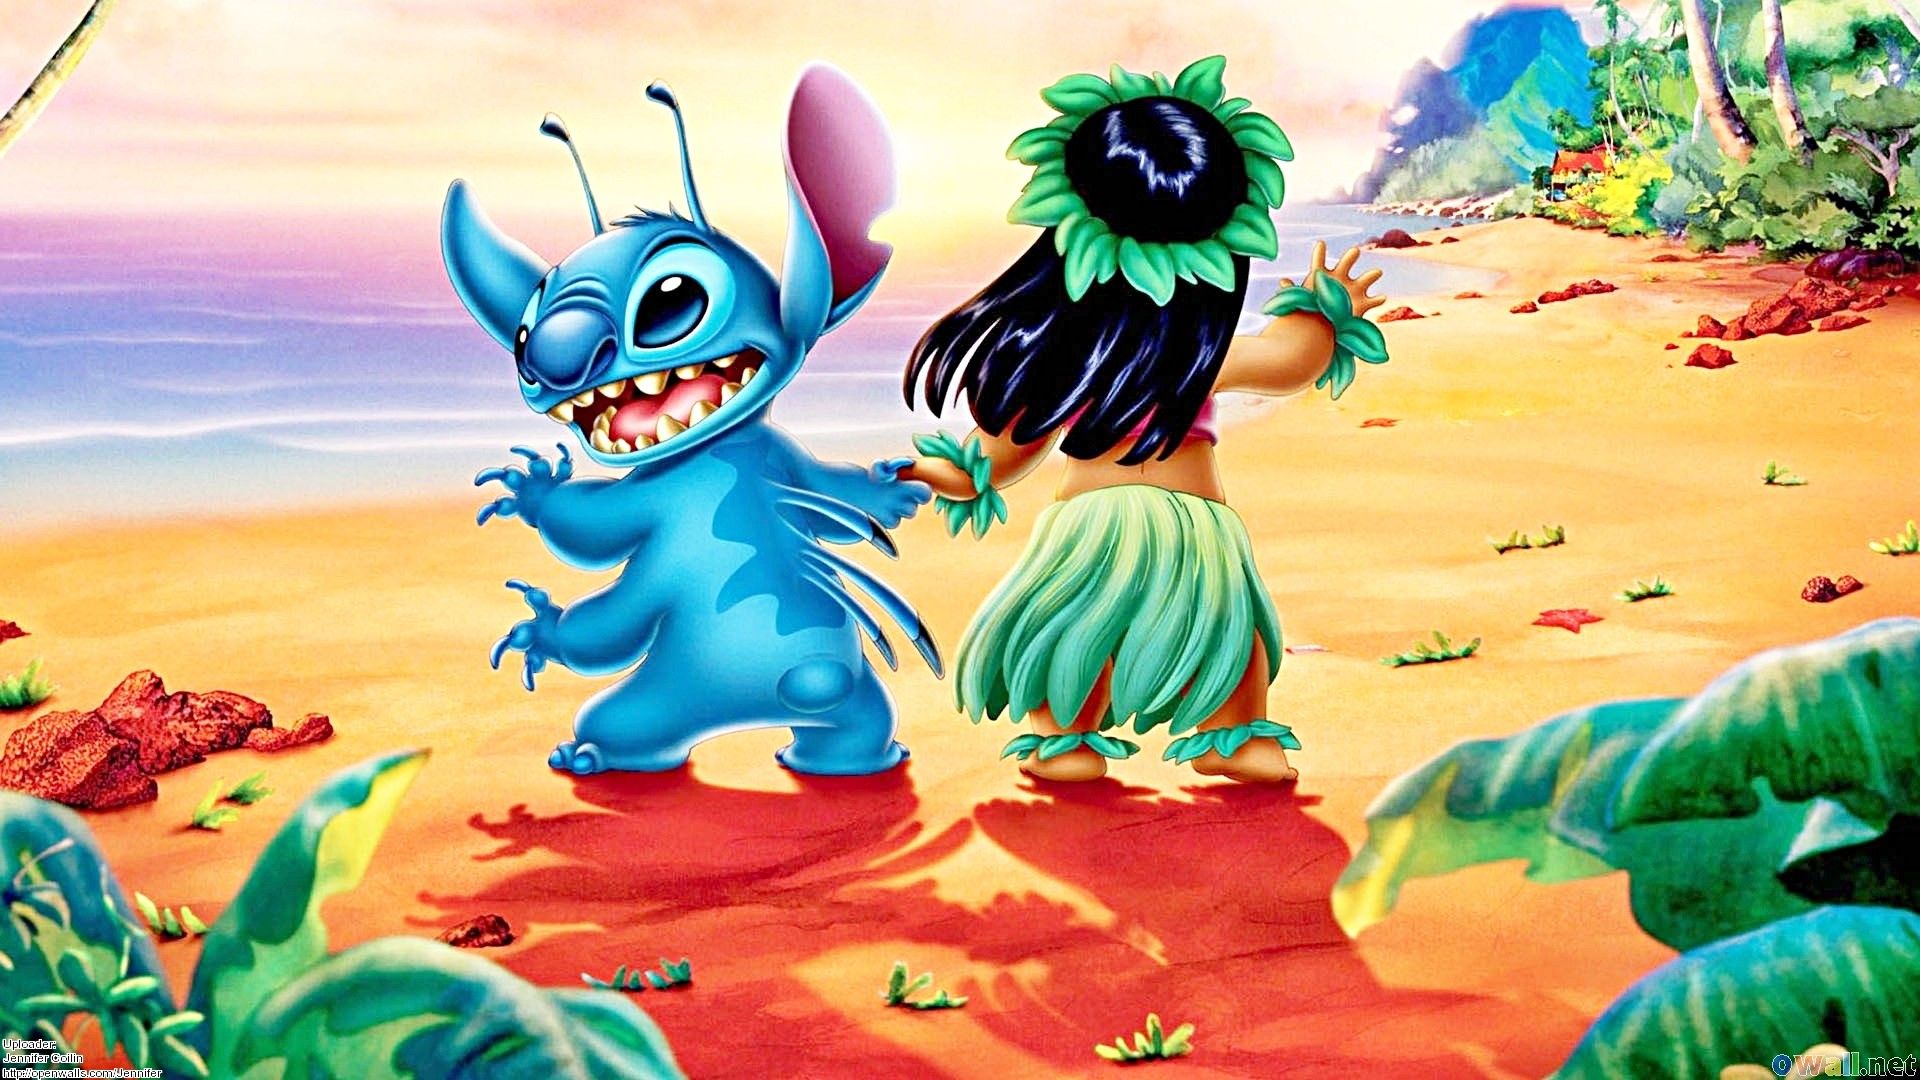 Aesthetic Stitch Disney Wallpapers - Wallpaper Cave